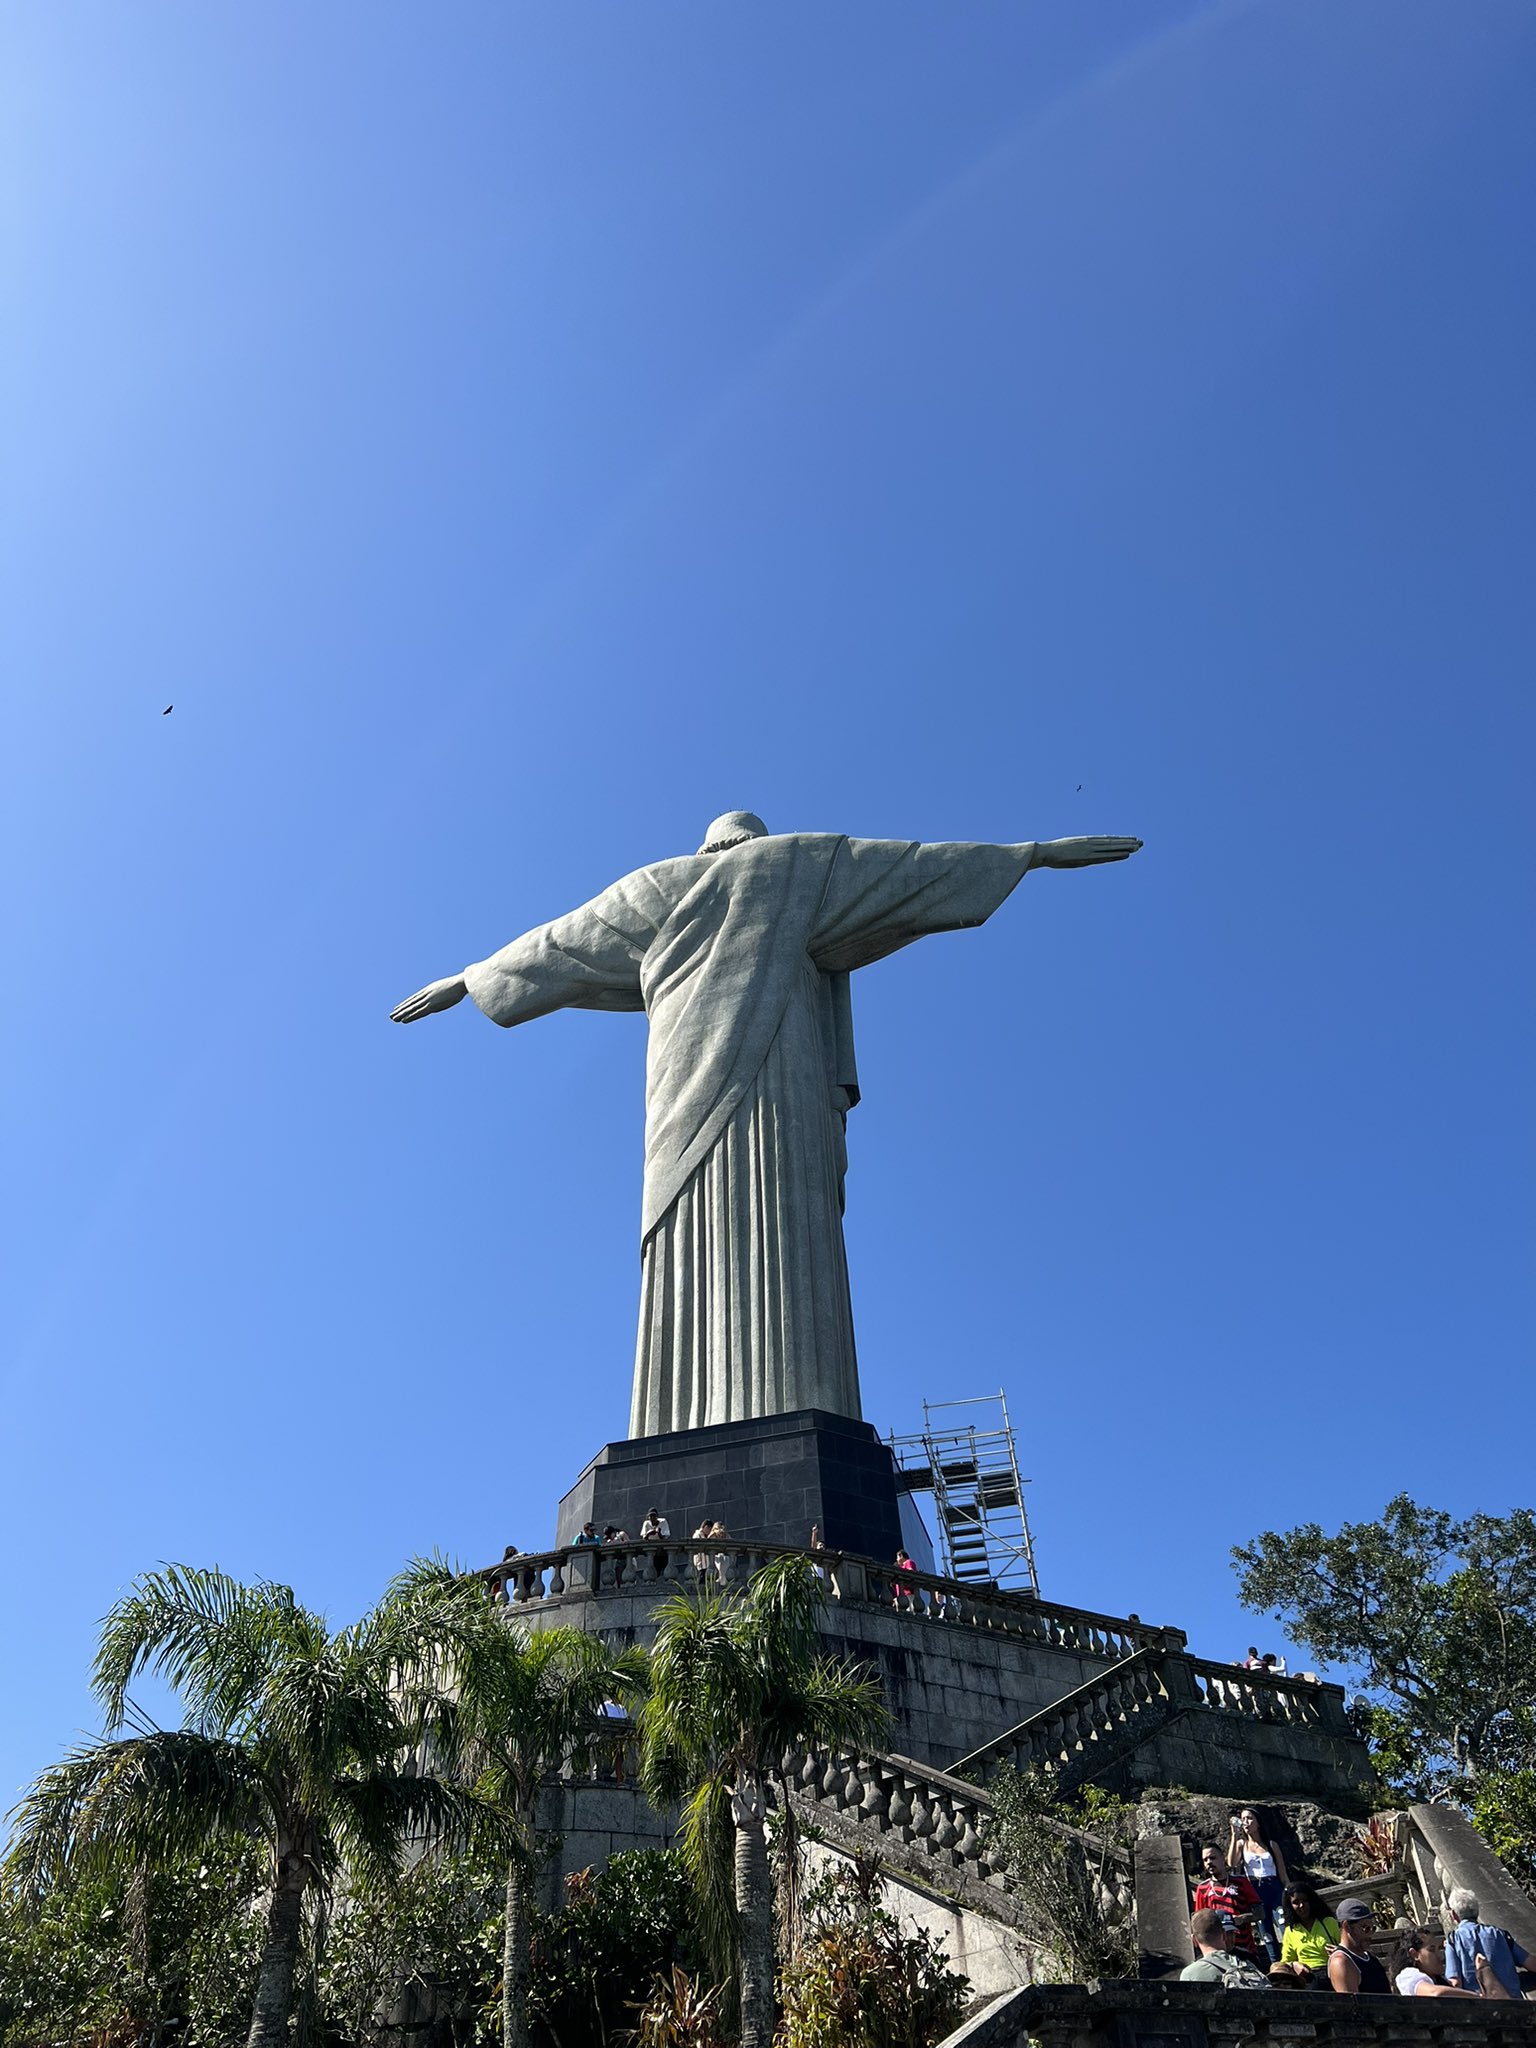 A statue of Jesus climbed up a hill in Brazil just to T-pose :  r/PewdiepieSubmissions